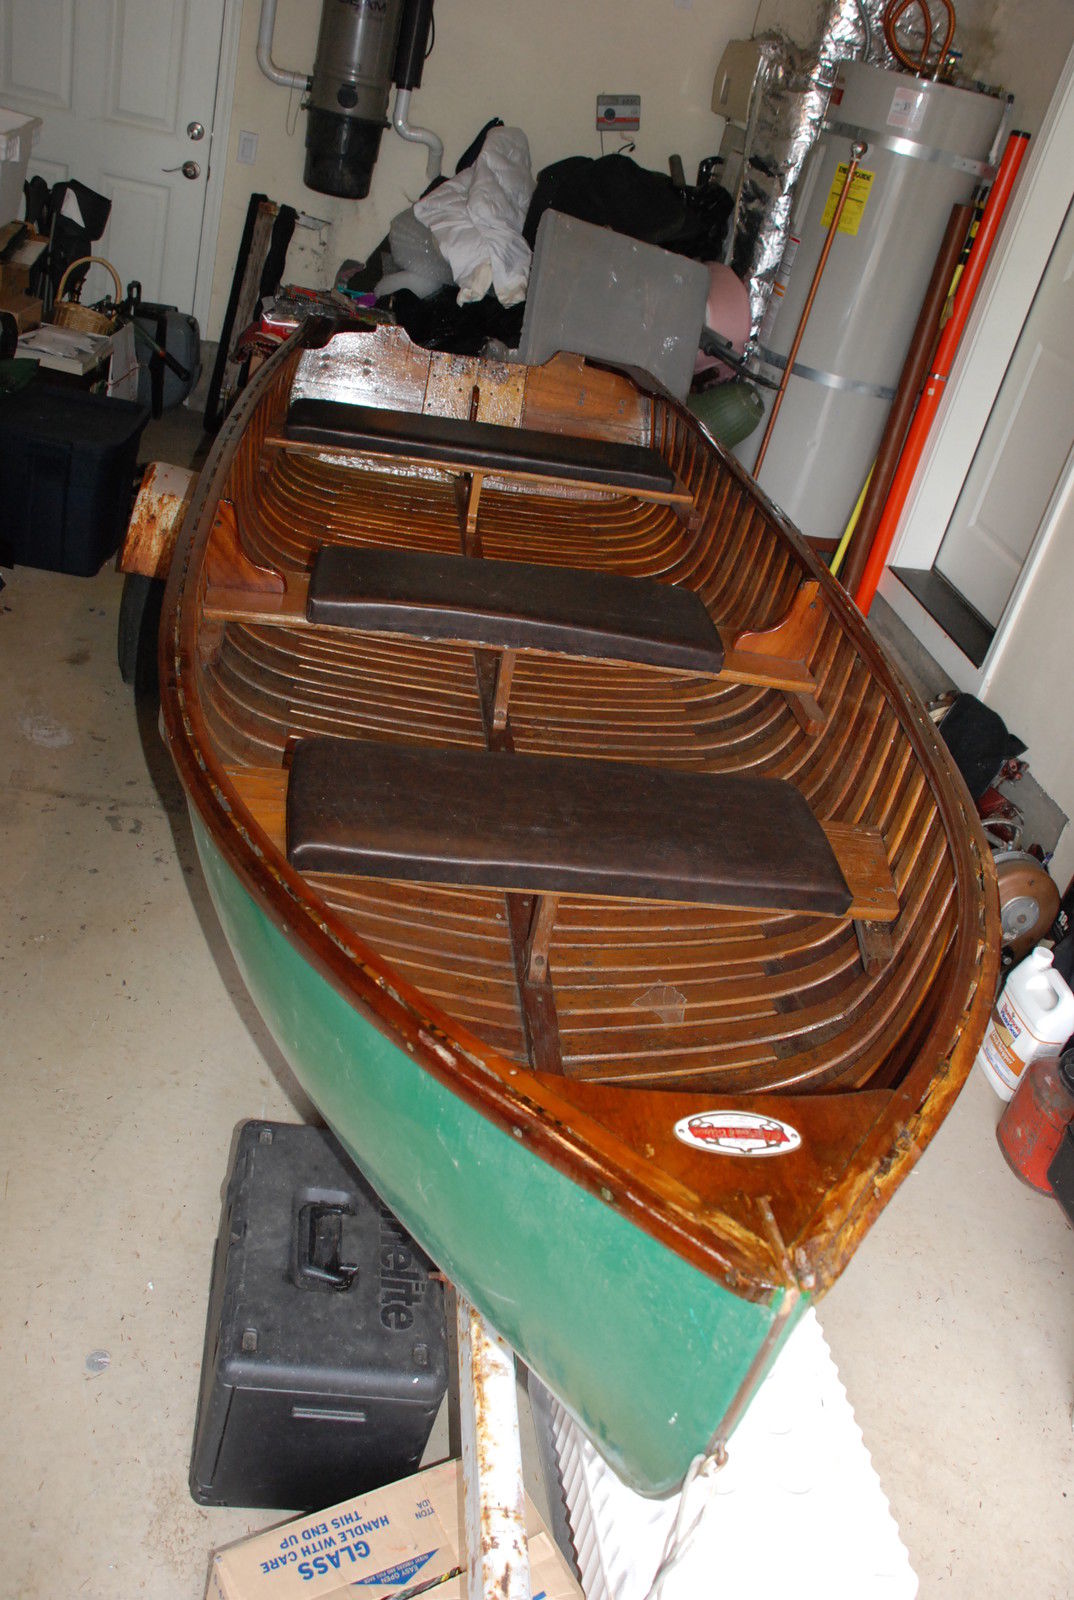 OLD TOWN RUNABOUT 1951 for sale for $590 - Boats-from-USA.com